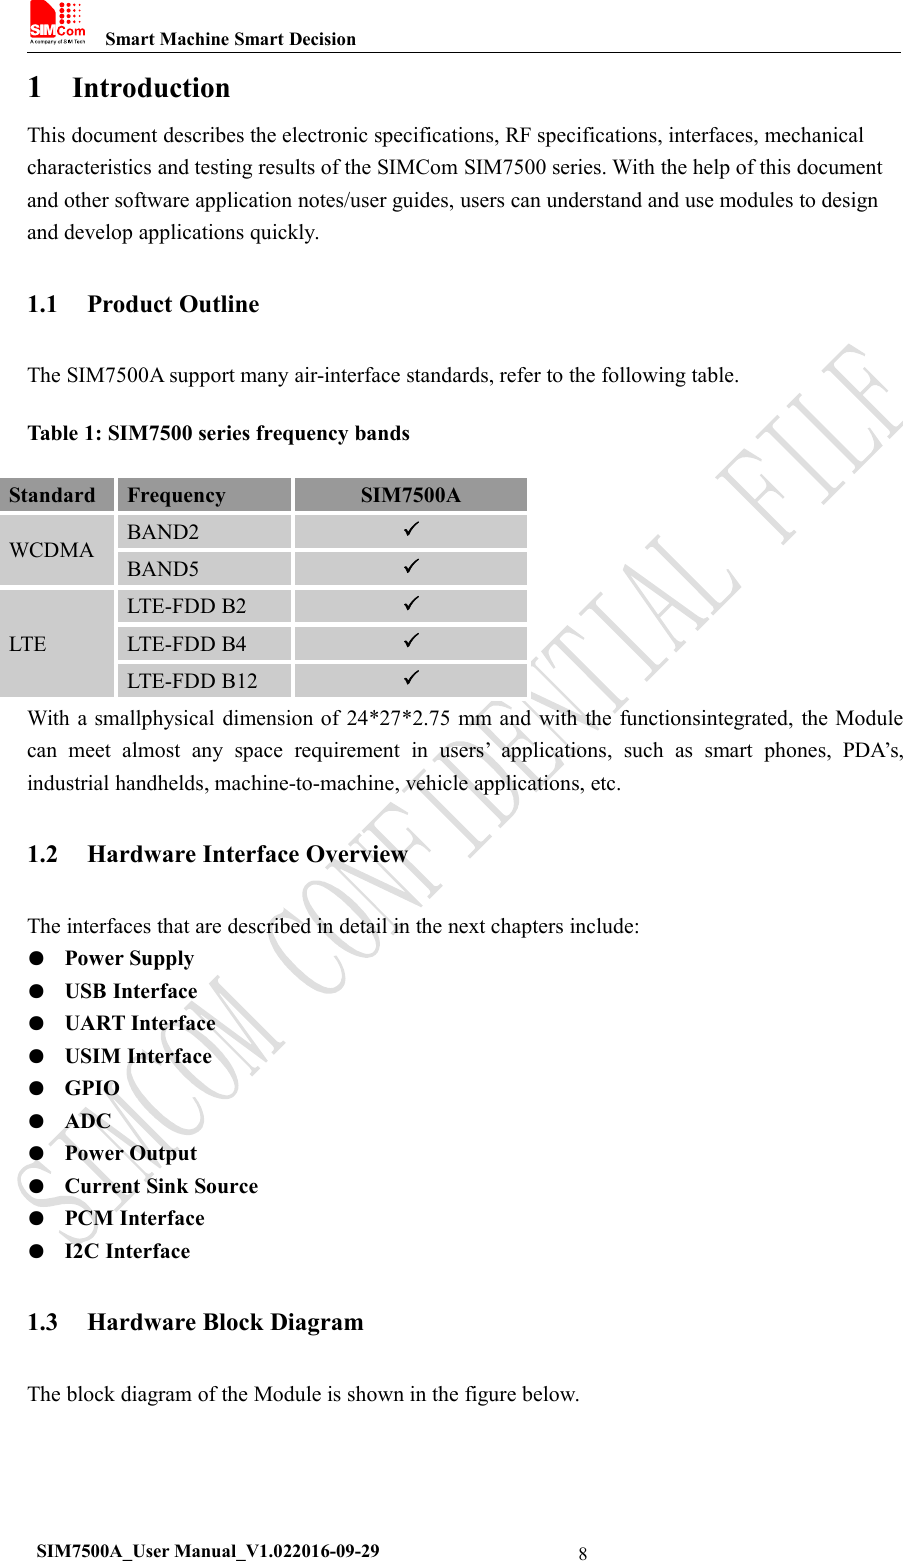 Smart Machine Smart DecisionSIM7500A_User Manual_V1.022016-09-2981IntroductionThis document describes the electronic specifications, RF specifications, interfaces, mechanicalcharacteristics and testing results of the SIMCom SIM7500 series. With the help of this documentand other software application notes/user guides, users can understand and use modules to designand develop applications quickly.1.1 Product OutlineThe SIM7500A support many air-interface standards, refer to the following table.Table 1: SIM7500 series frequency bandsStandardFrequencySIM7500AWCDMABAND2BAND5LTELTE-FDD B2LTE-FDD B4LTE-FDD B12With a smallphysical dimension of 24*27*2.75 mm and with the functionsintegrated, the Modulecan meet almost any space requirement in users’ applications, such as smart phones, PDA’s,industrial handhelds, machine-to-machine, vehicle applications, etc.1.2 Hardware Interface OverviewThe interfaces that are described in detail in the next chapters include:●Power Supply●USB Interface●UART Interface●USIM Interface●GPIO●ADC●Power Output●Current Sink Source●PCM Interface●I2C Interface1.3 Hardware Block DiagramThe block diagram of the Module is shown in the figure below.